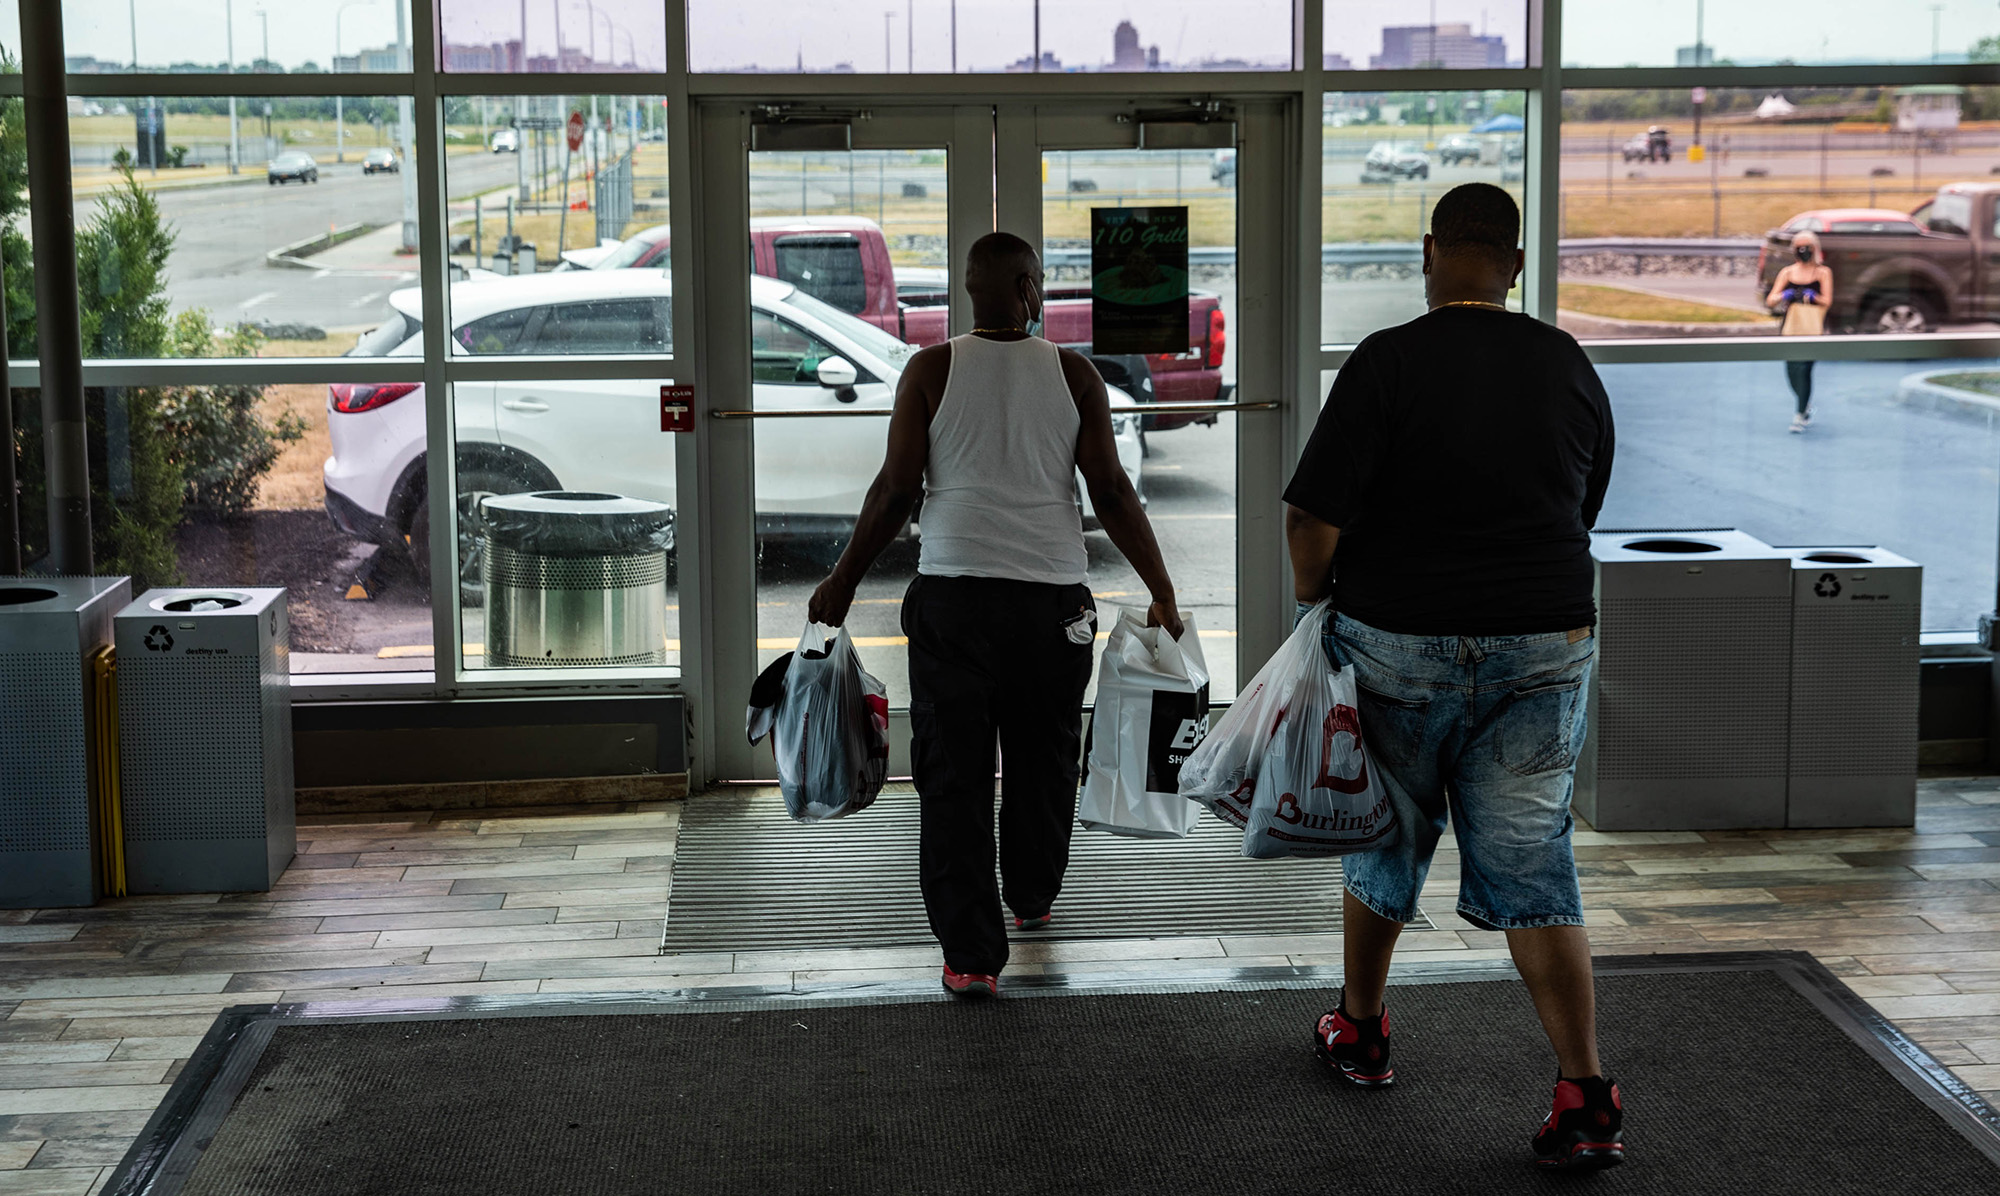 Customers carrying shopping bags exit from a mall in Syracuse, New York on July 10.